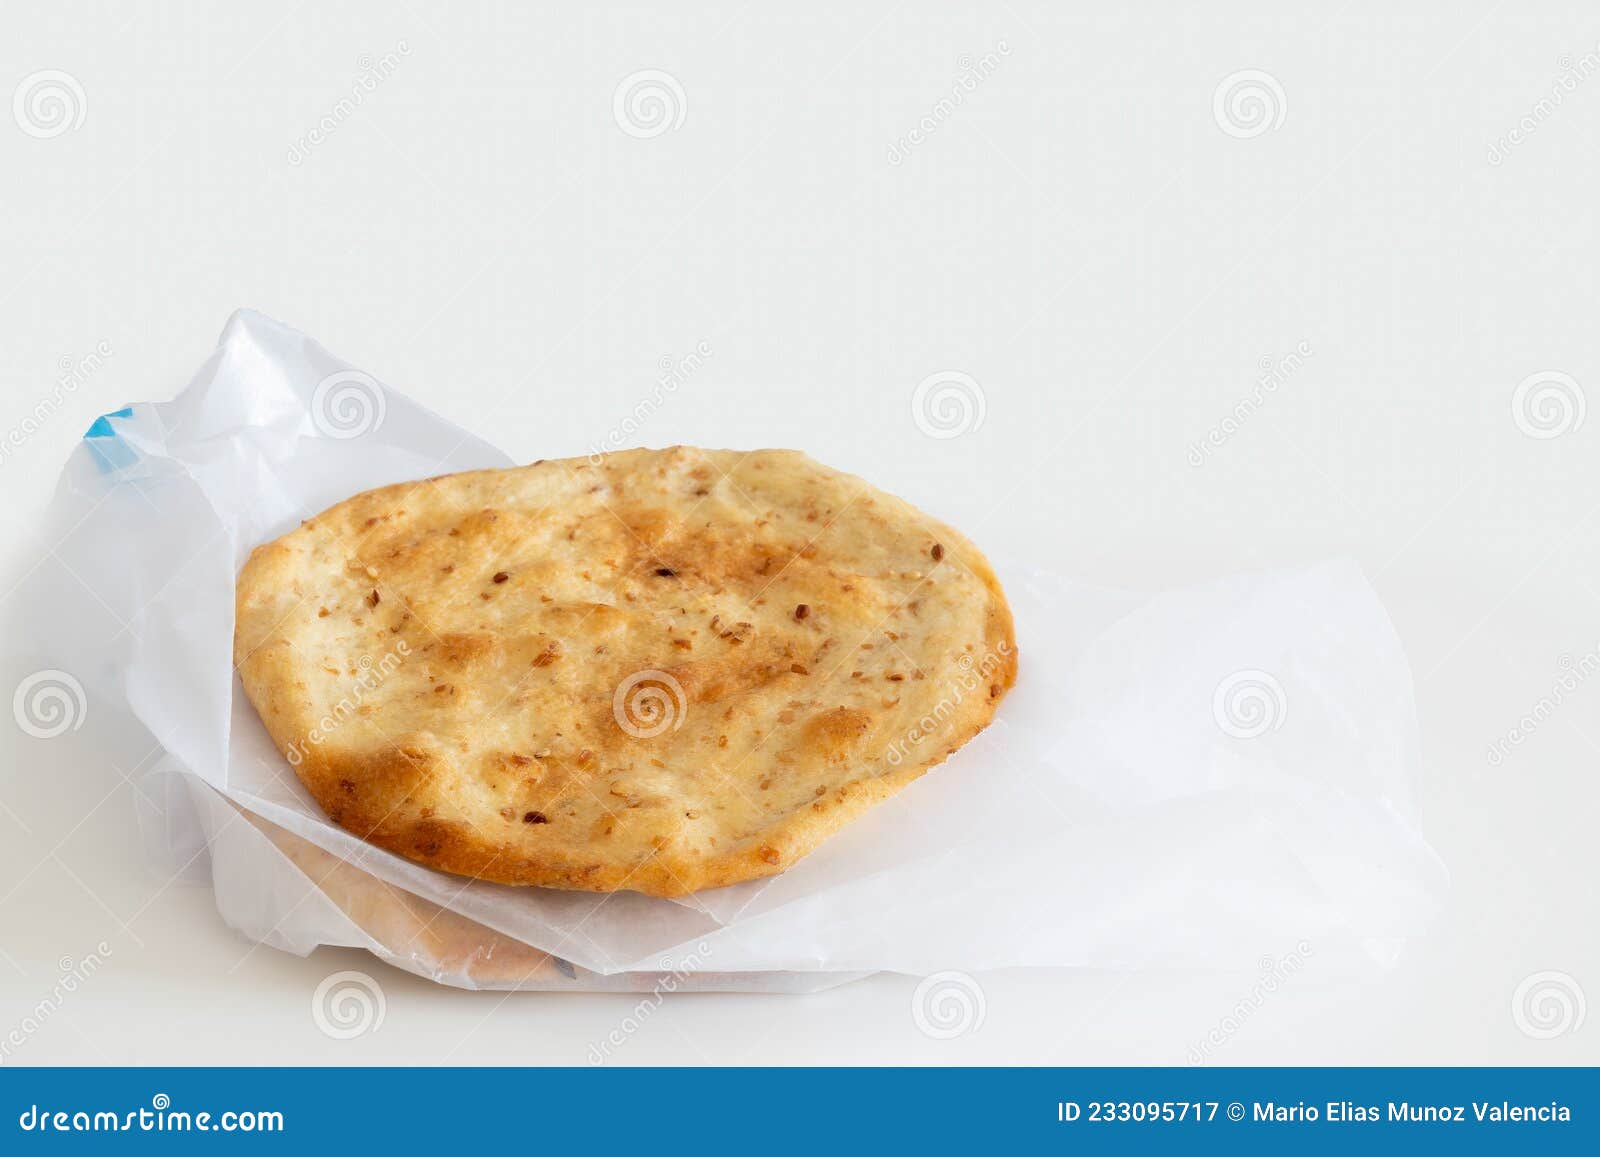 spanish aniseed pastries tortas de aceite, on white background